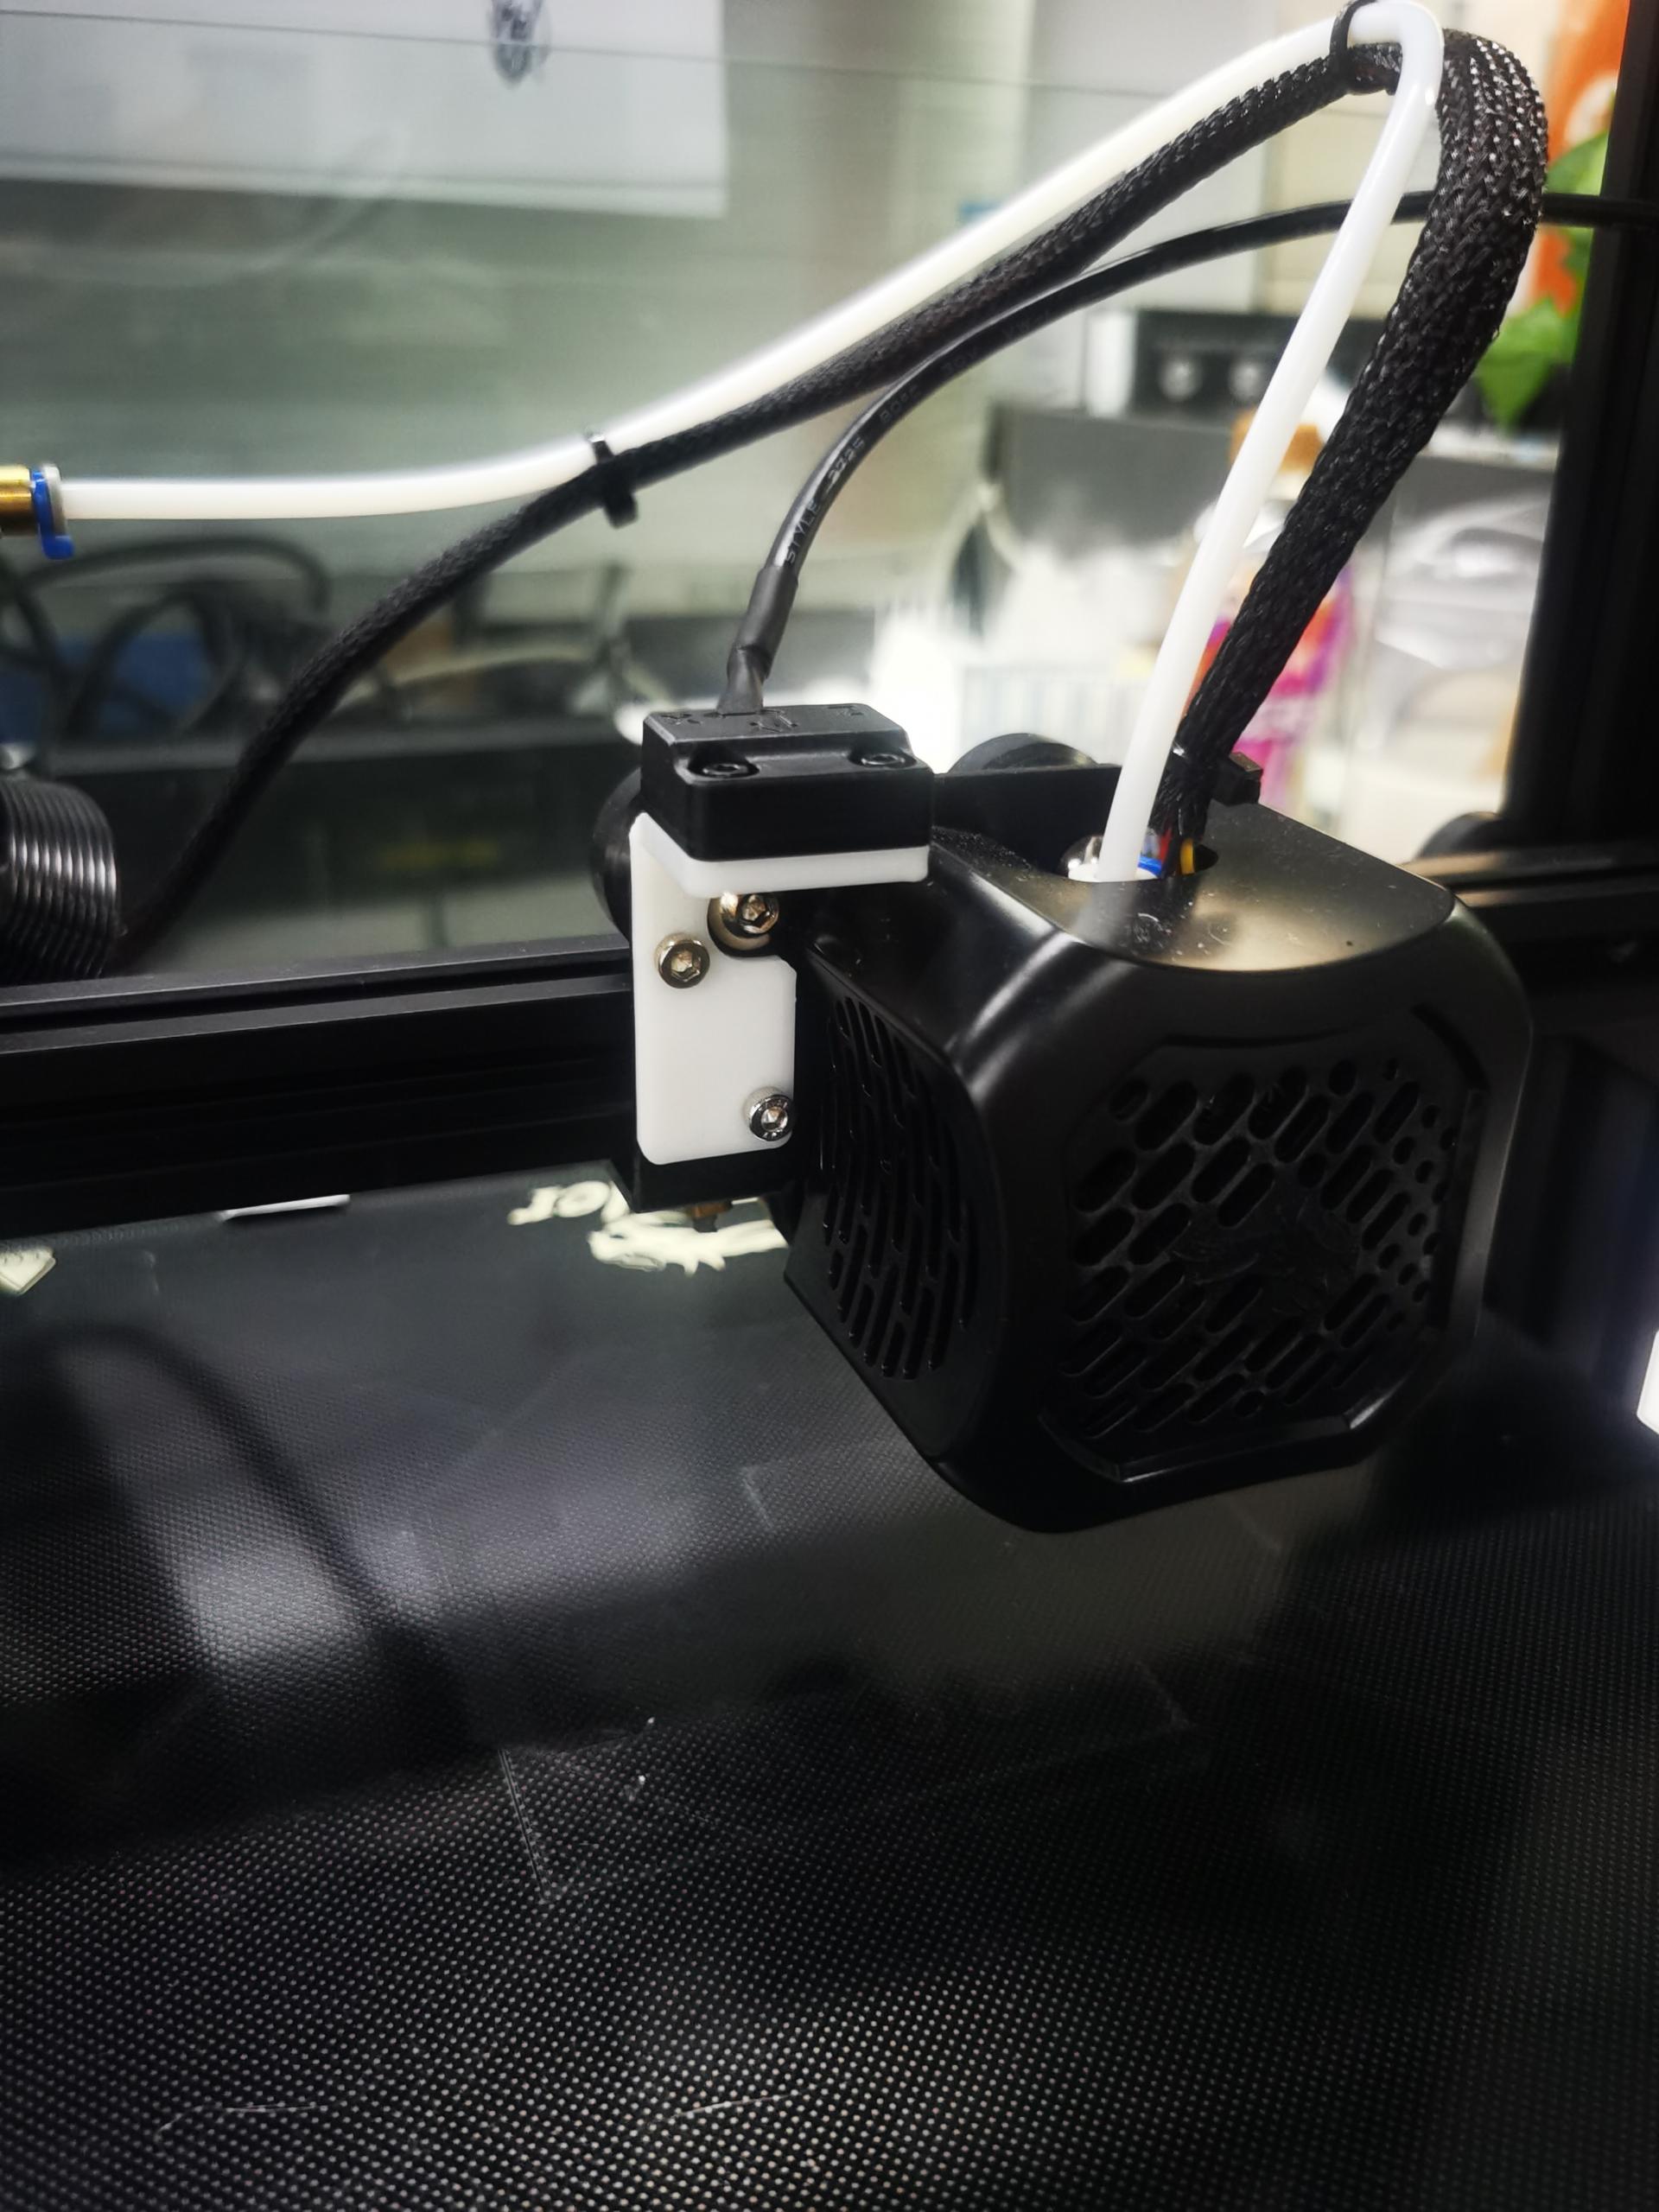 Sensor bracket Ender3 V2 stock | Creality Sonic Pad Review: Klipper Firmware with Compromises